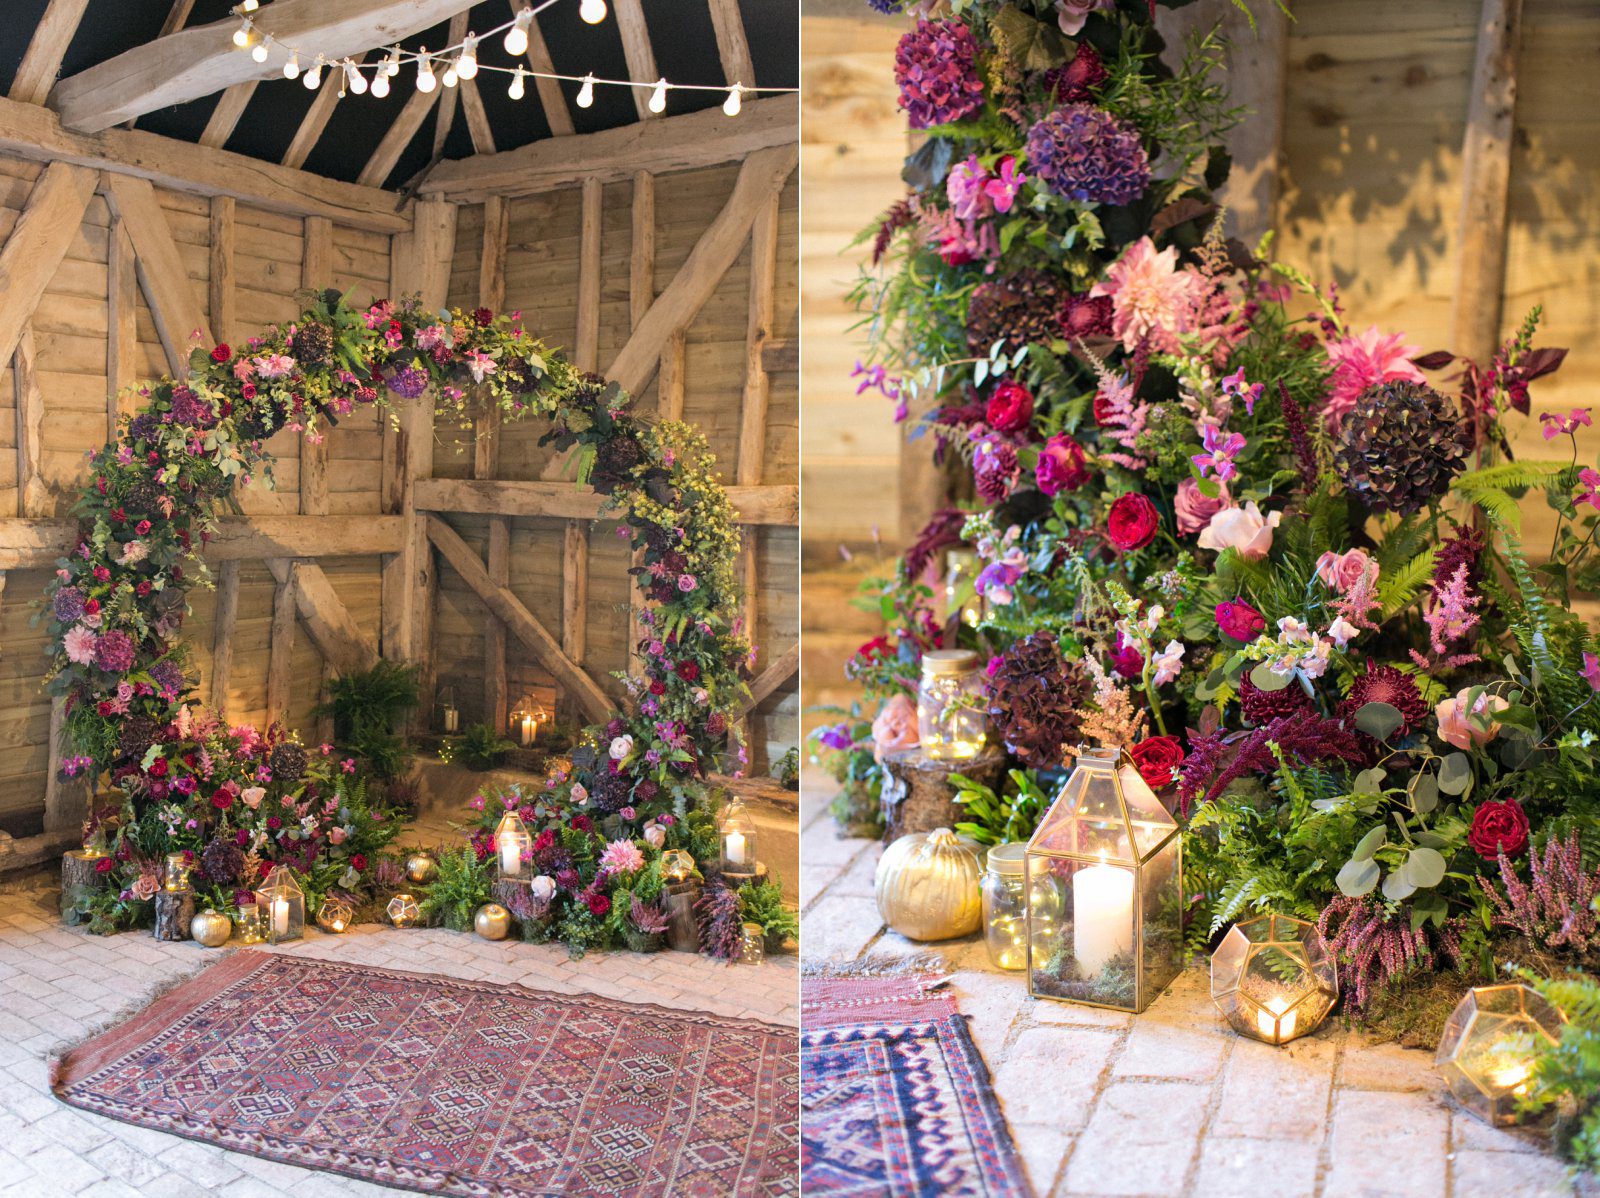 Kate Avery Flowers creates a large flower moongate arch at High Billinghurst Farm